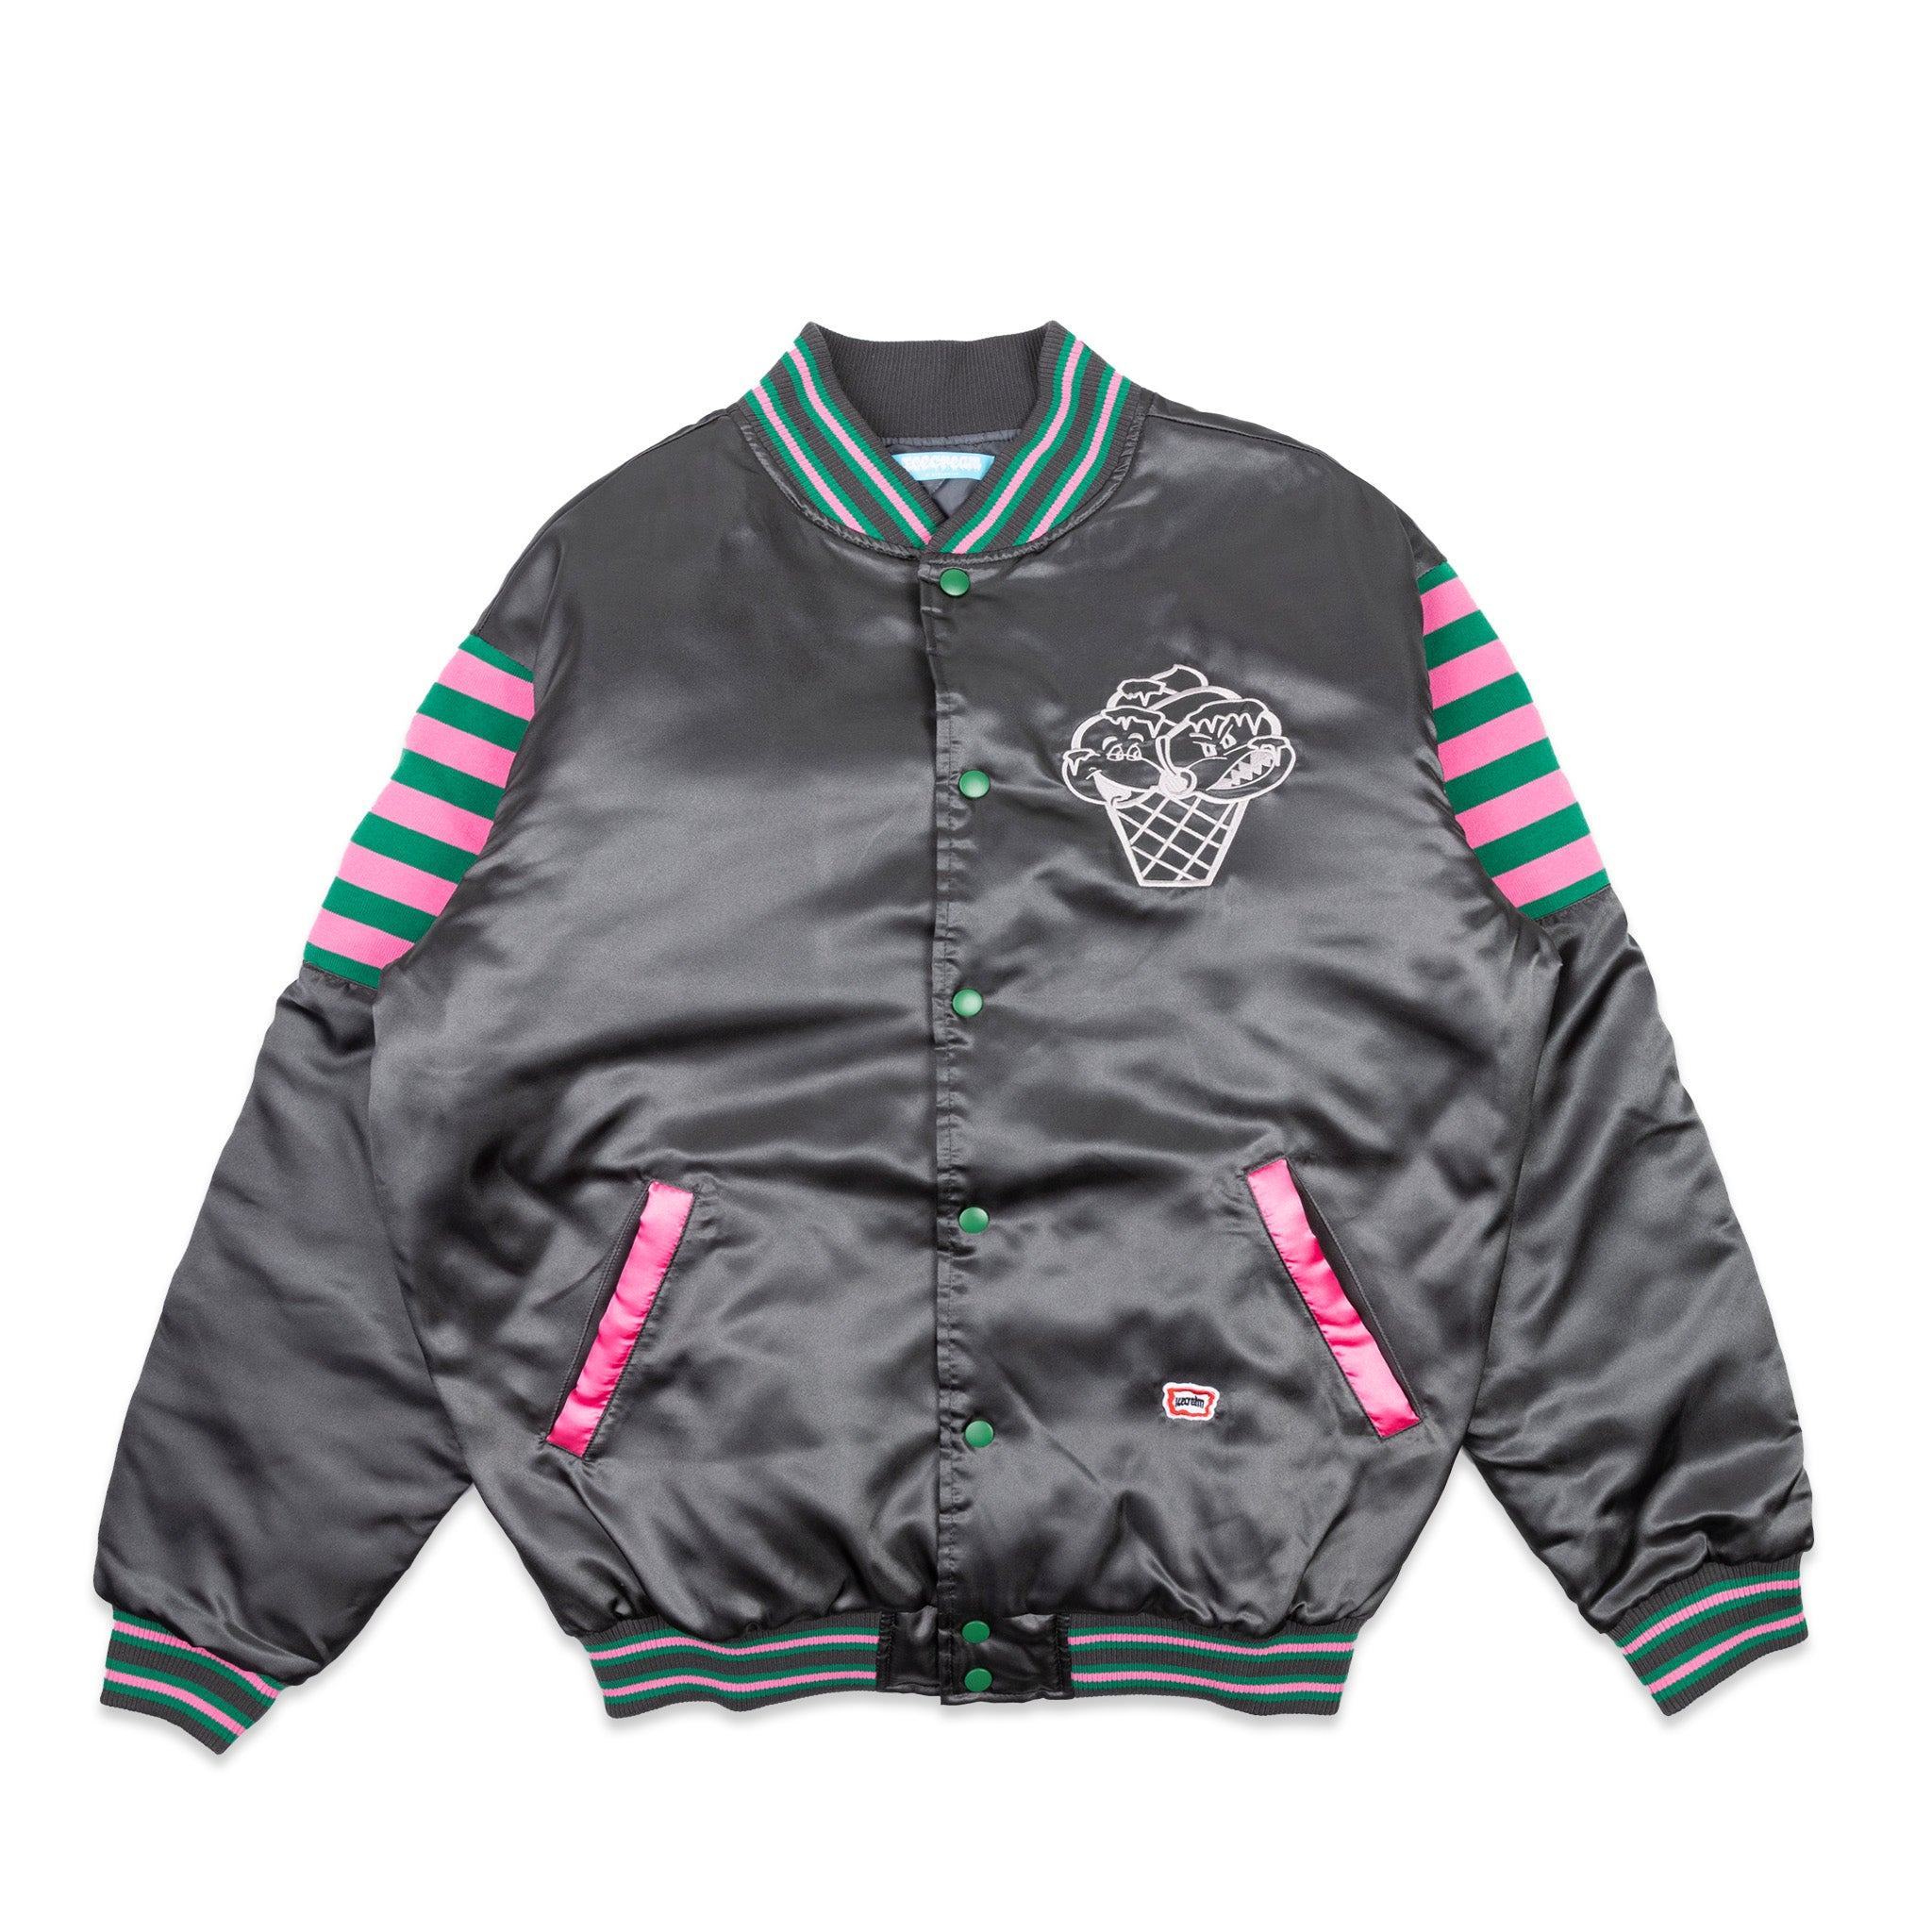 White Satin Baseball Jacket with Pink pockets and Knit lines